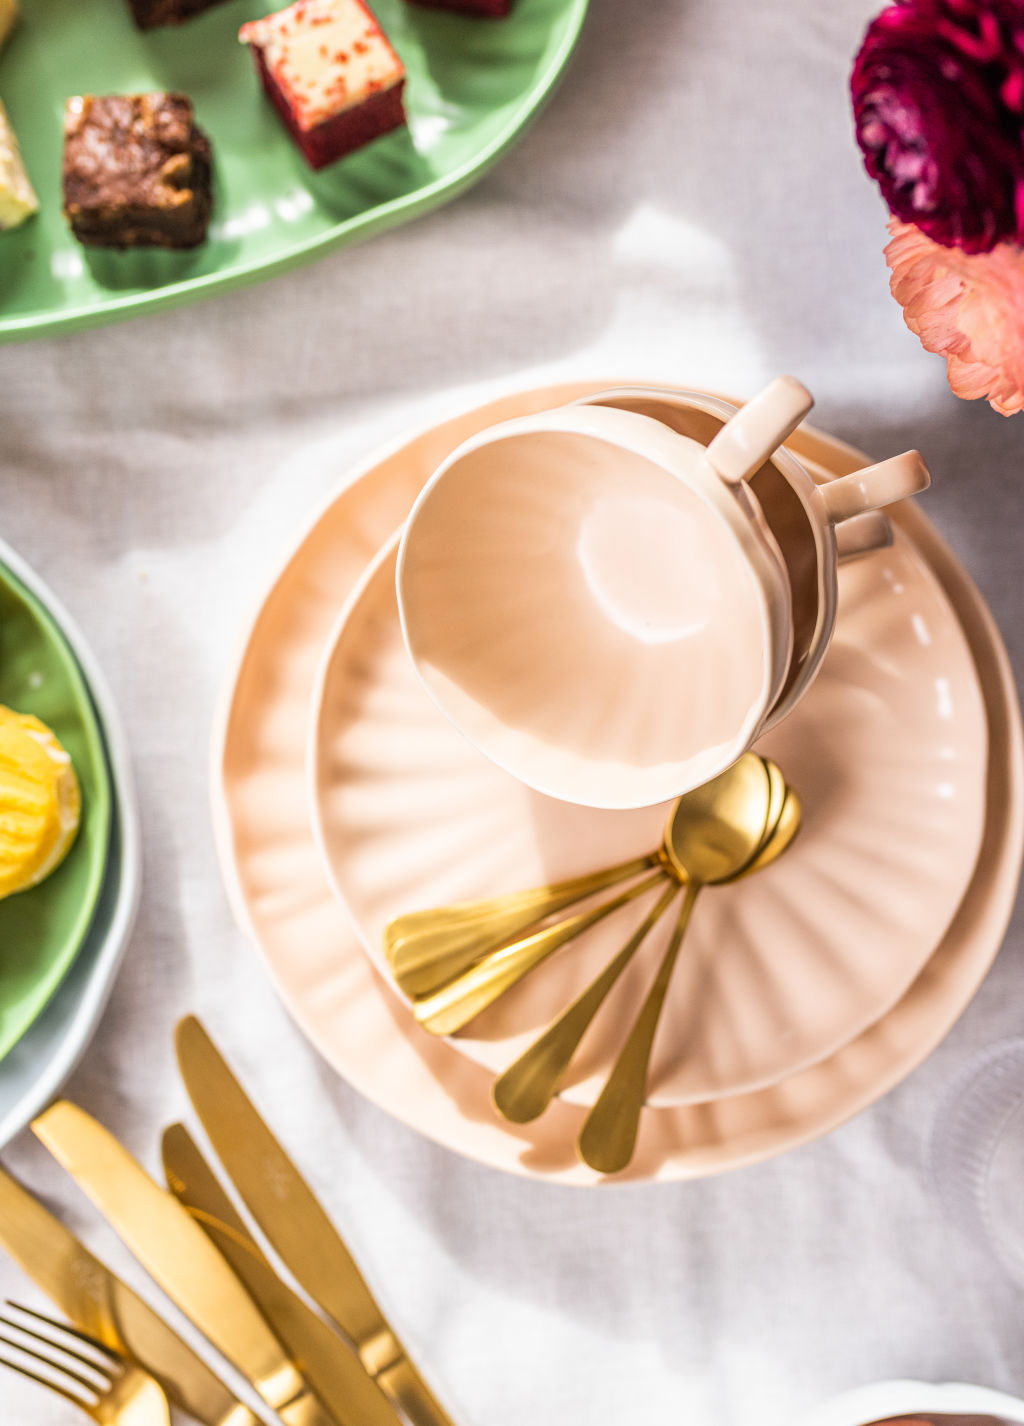 Chyka Keebaugh's homewares range features champagne-gold and matt-copper cutlery sets and peachy-pink linen napkins and place mats. Photo: Supplied.